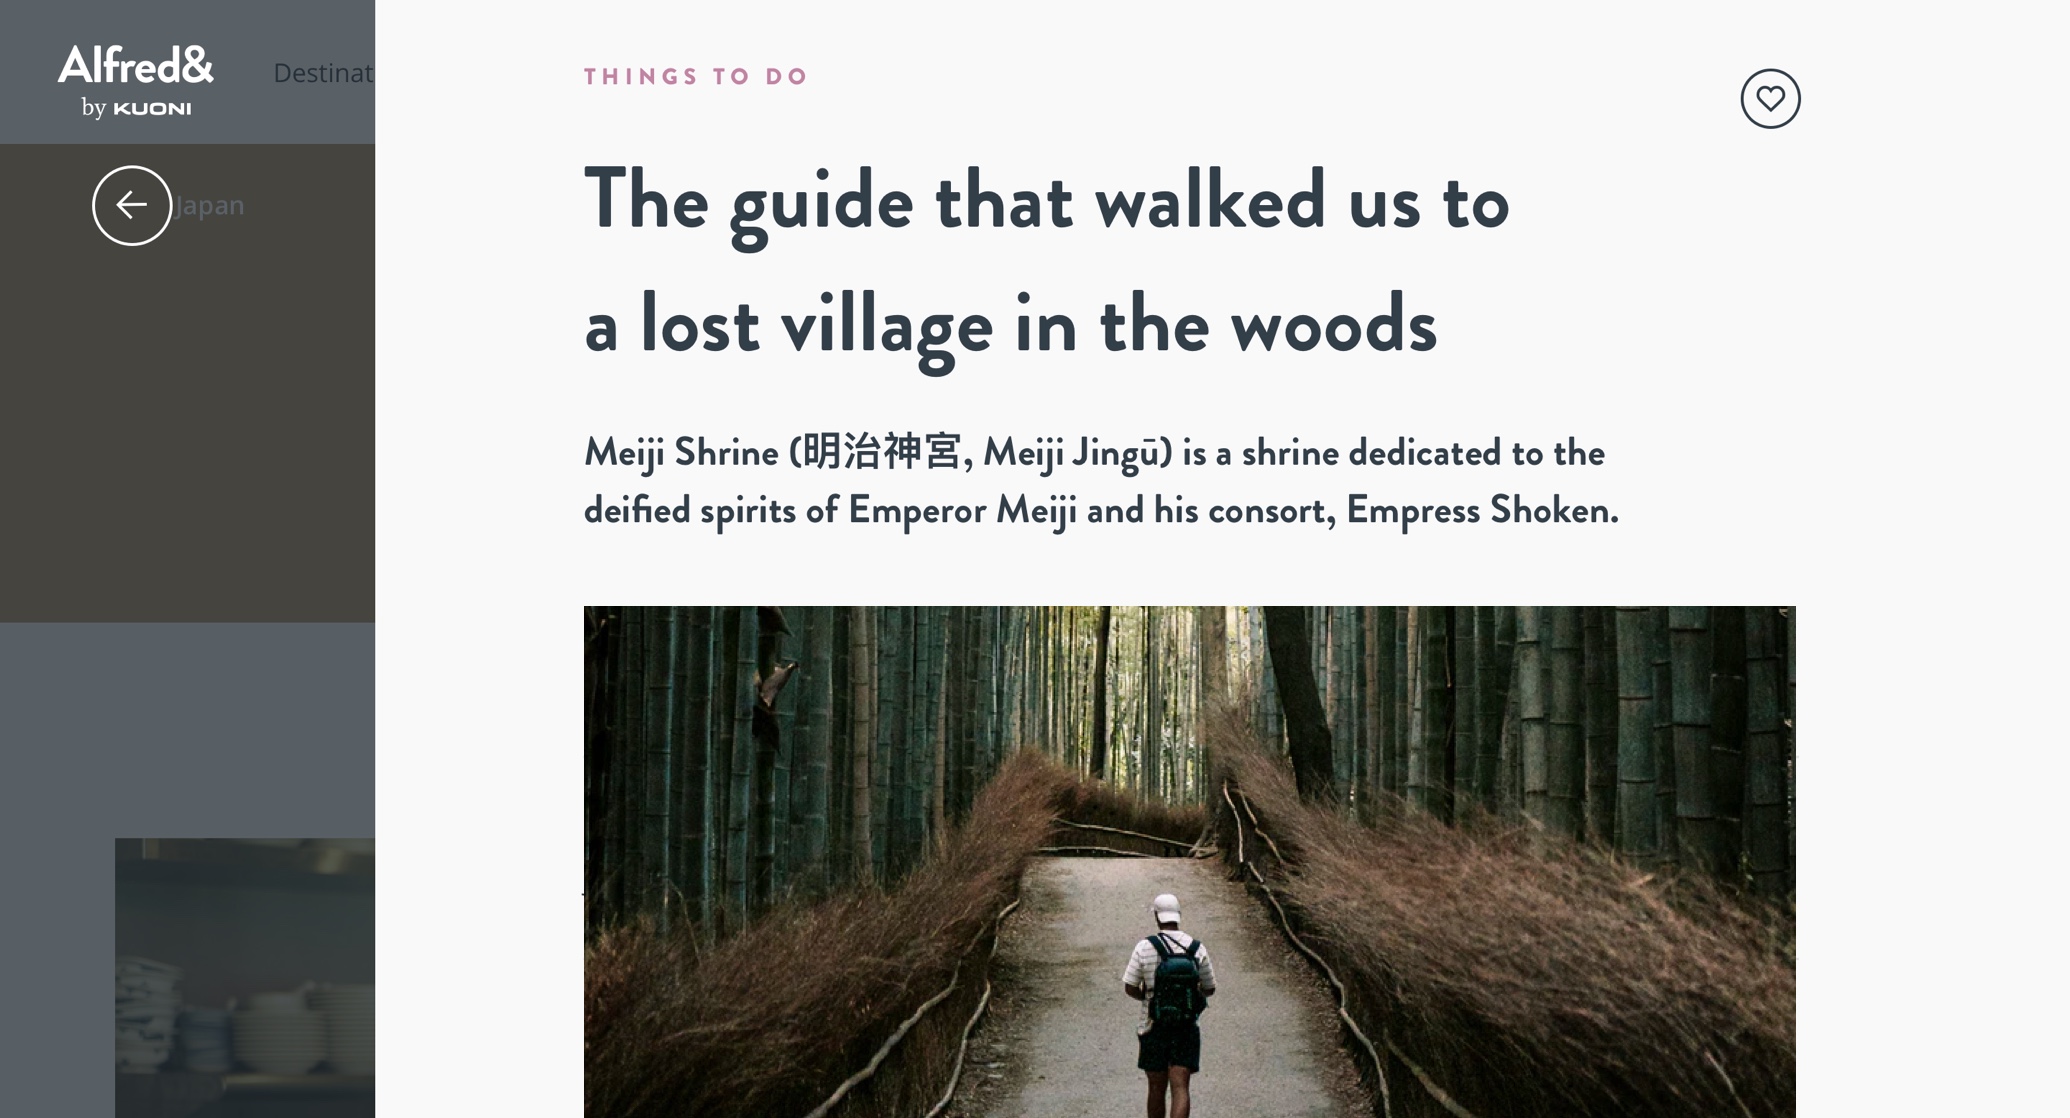 Alfred& 'things to do': 'The guide that walked us to a lost village in the woods'